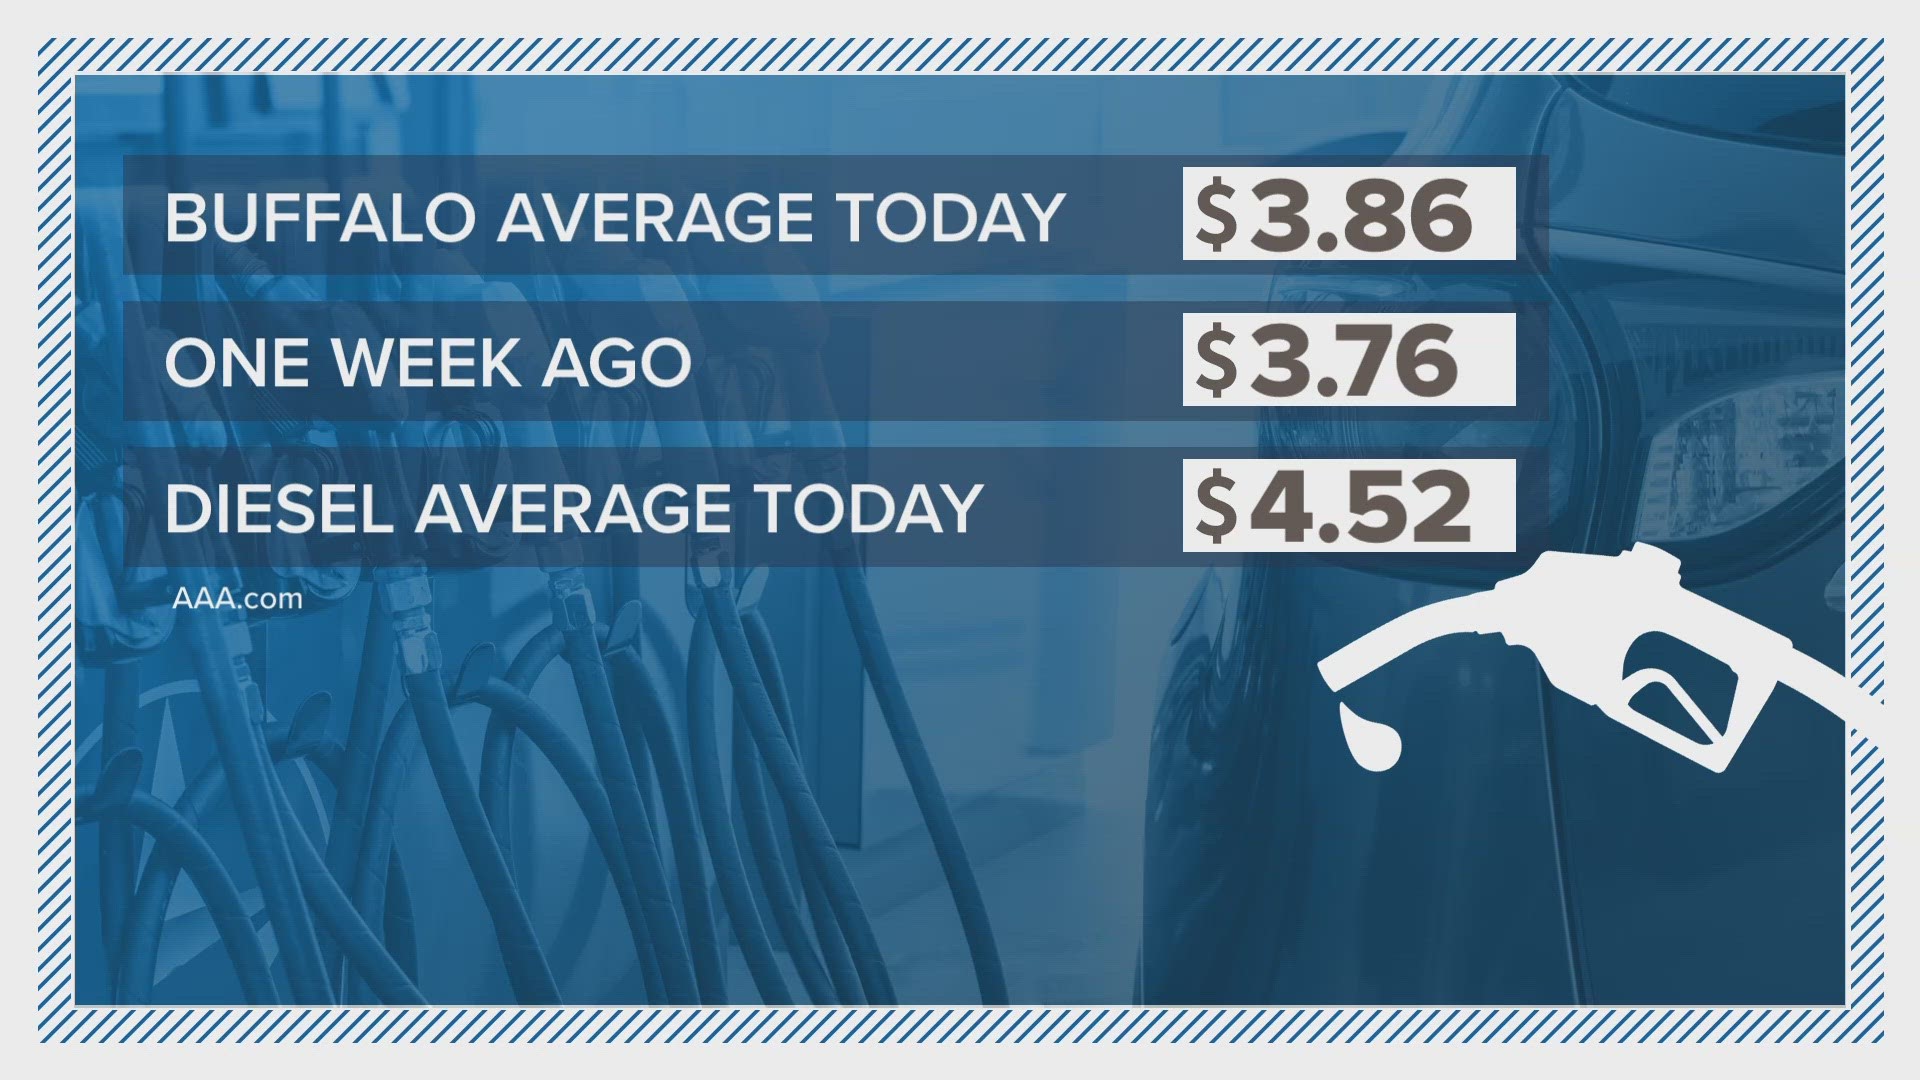 The average price for a gallon of regular gas is now $3.86 in the Buffalo area.